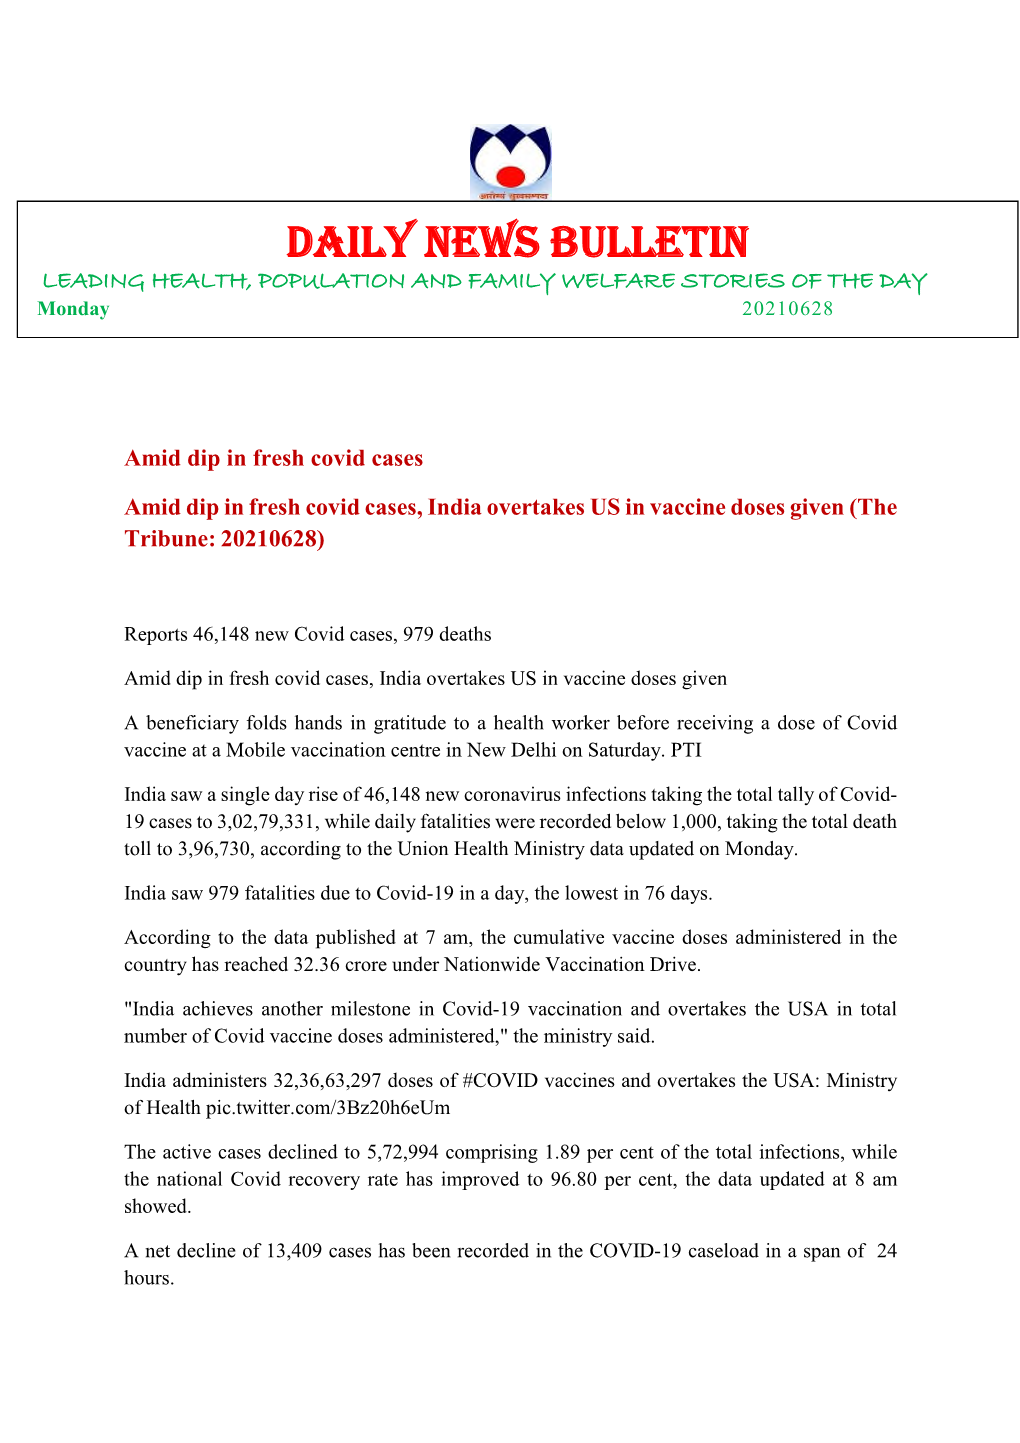 DAILY NEWS BULLETIN LEADING HEALTH, POPULATION and FAMILY WELFARE STORIES of the DAY Monday 20210628